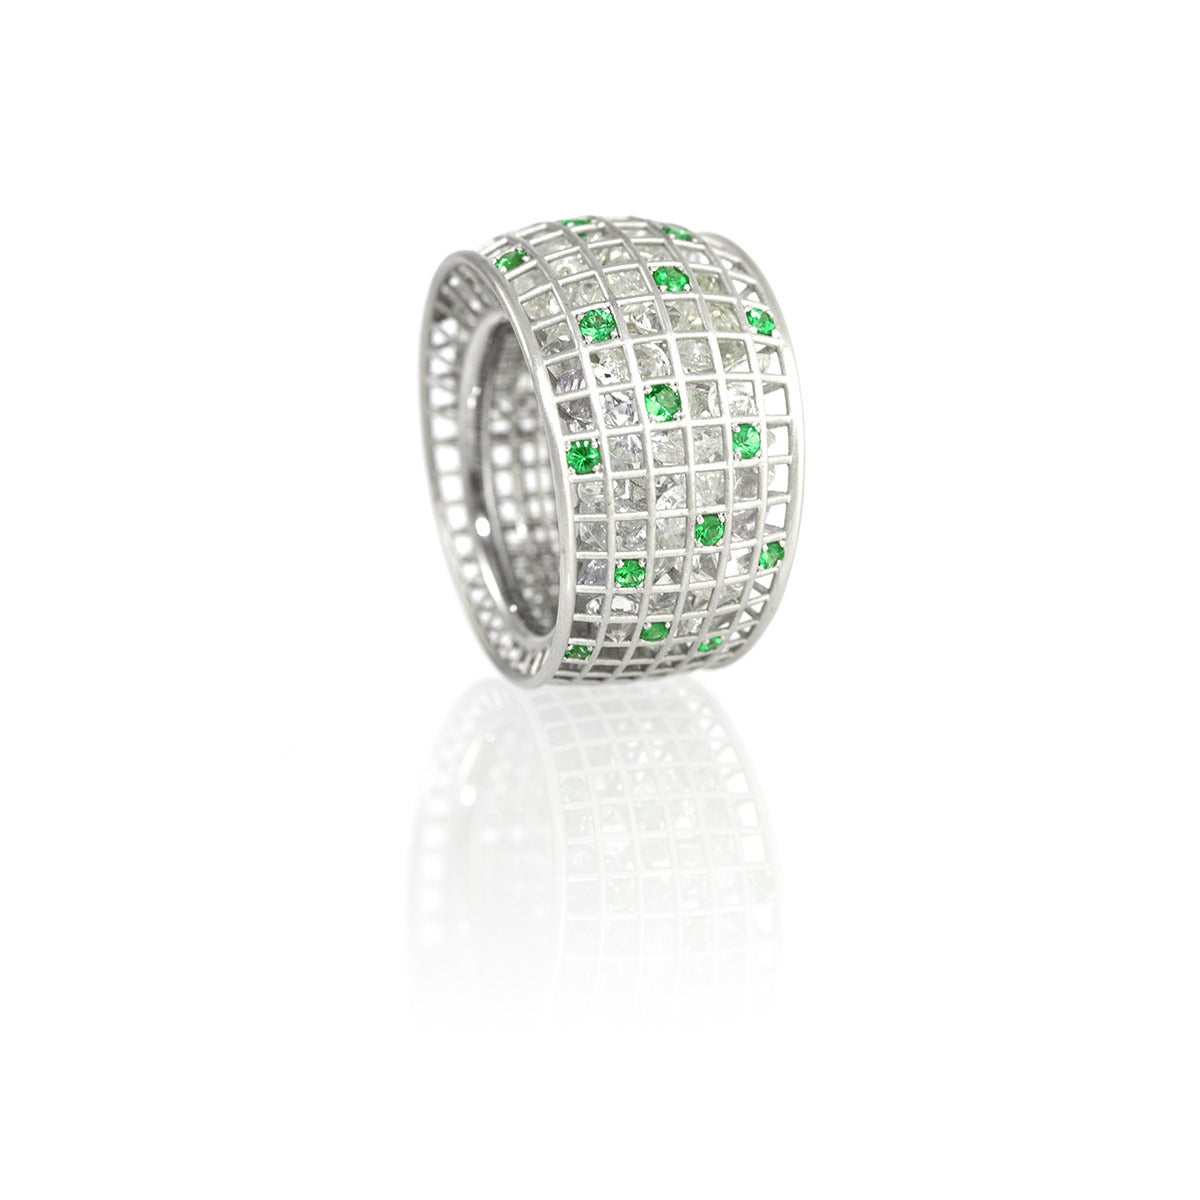 From the Wired Collection, an 18k white gold ring with an Art Deco feel, set with tsavorite garnets (0.64 ct) and filled with loose white sapphires (17 cts). Square grid pattern. Size 6-3/4.